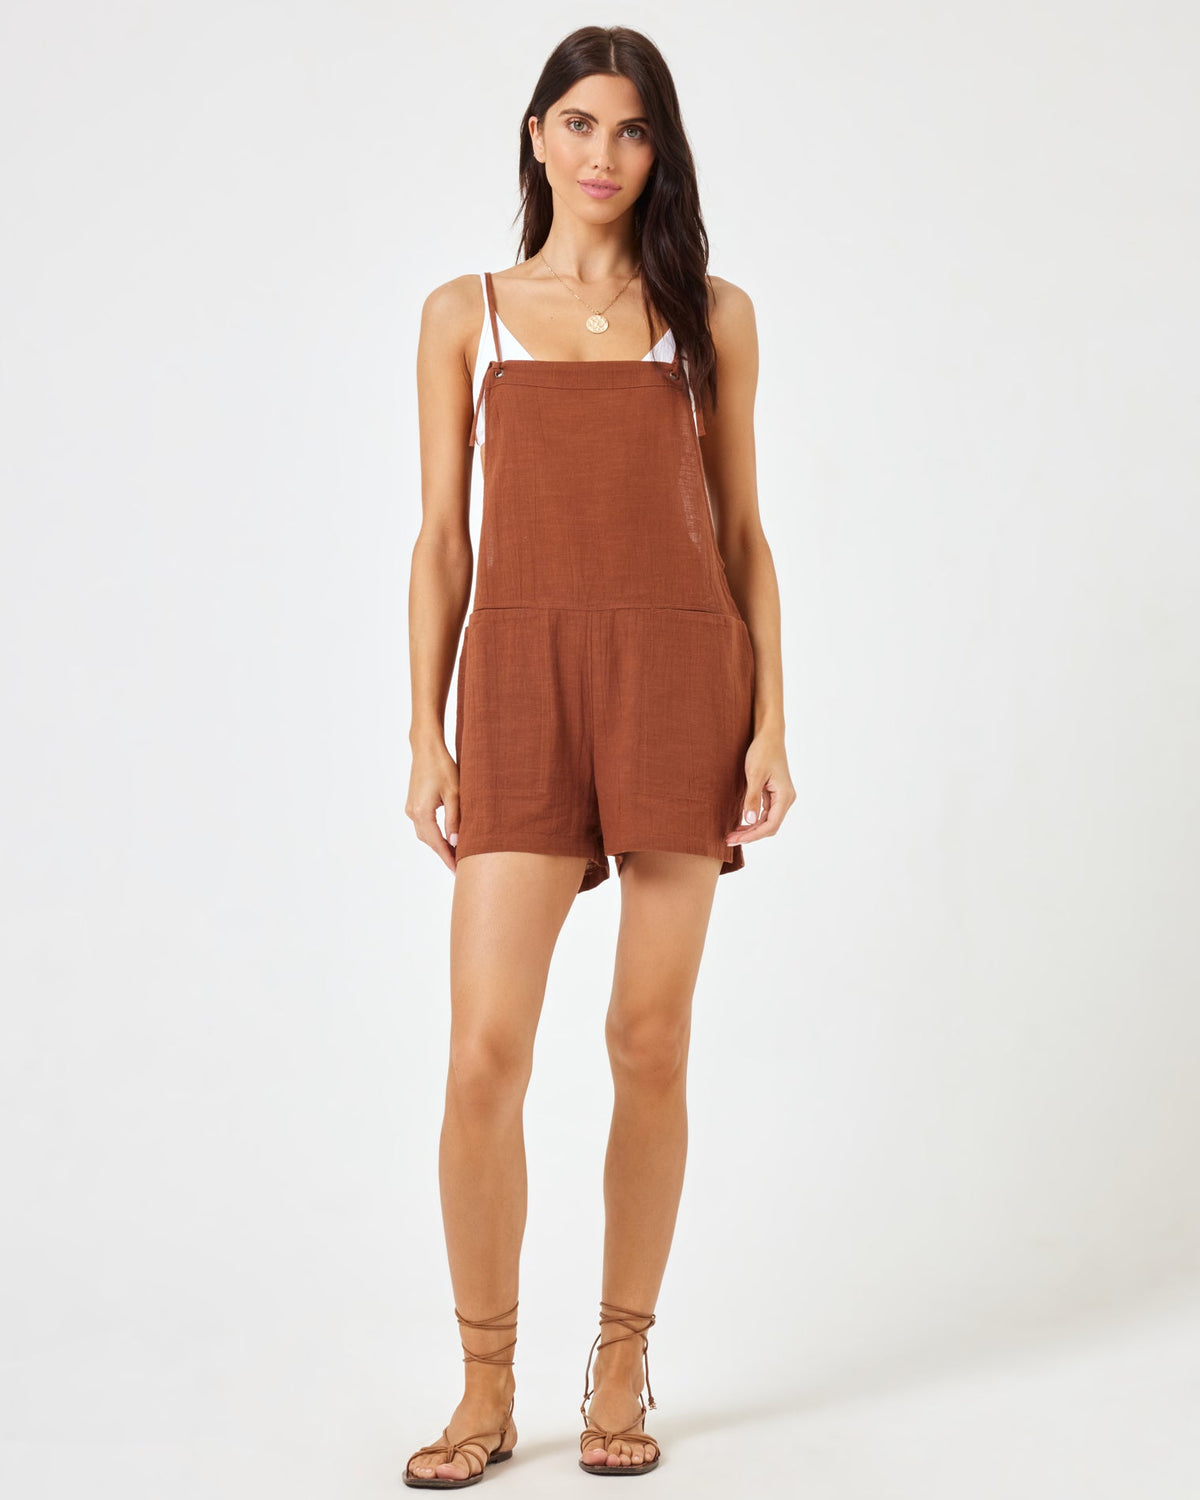 Indy Romper - Coffee Coffee | Model: Diana (size: S)